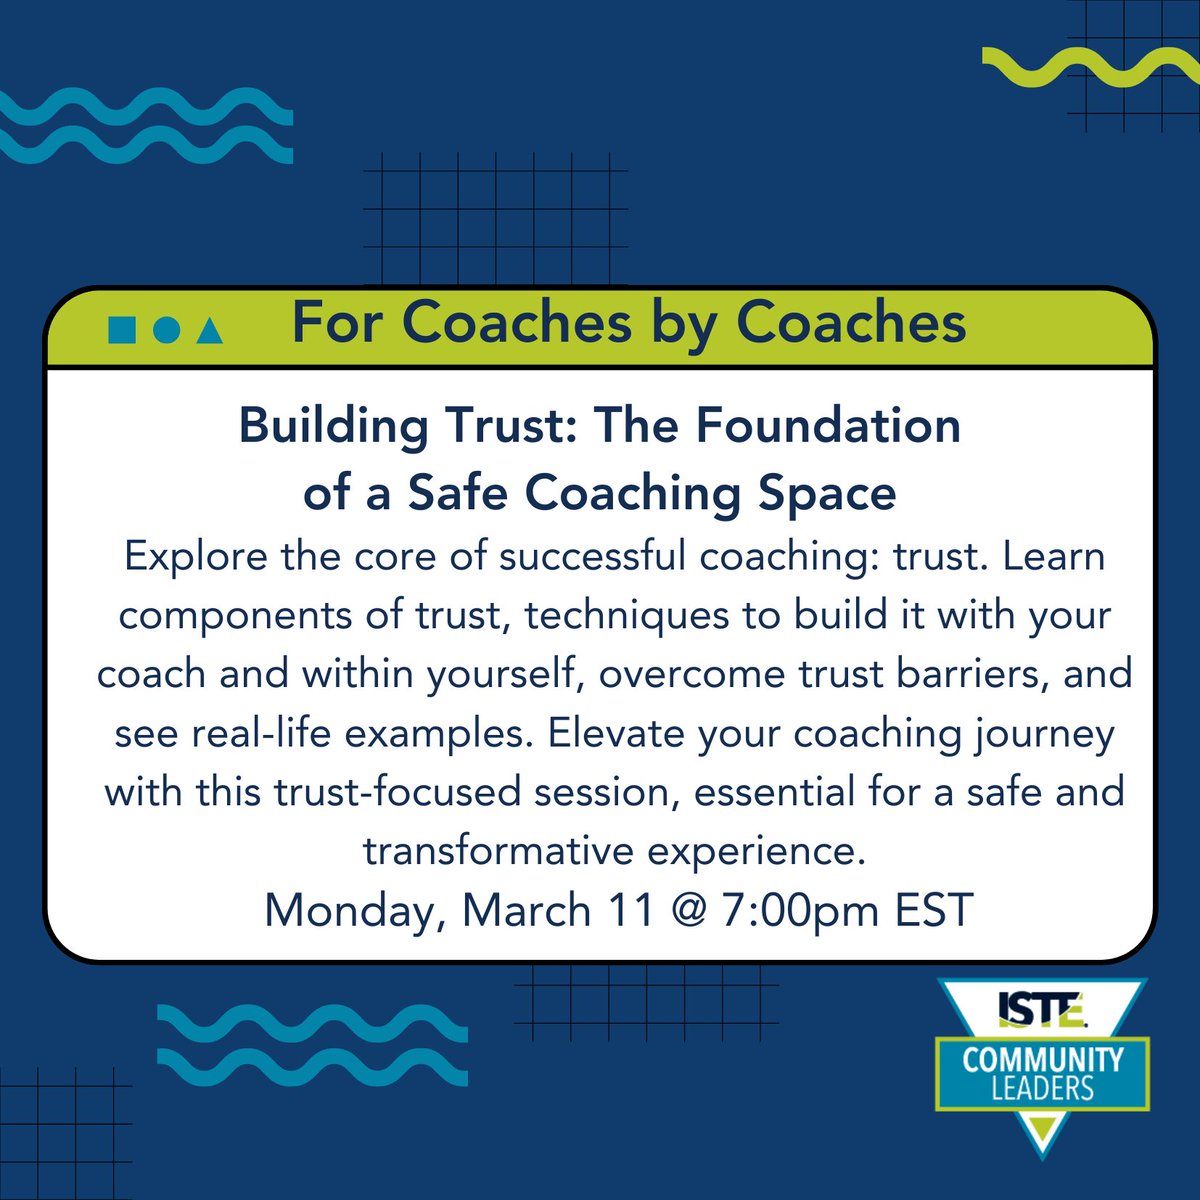 Join @ISTECommunity Leaders for the #Coaches meetup on Monday, Mar 11 at 7pm EST to learn about creating a safe coaching space with @gret and @mrshowell24! 📷 Register here: bit.ly/ISTECoachMAR #ForCoachesByCoaches